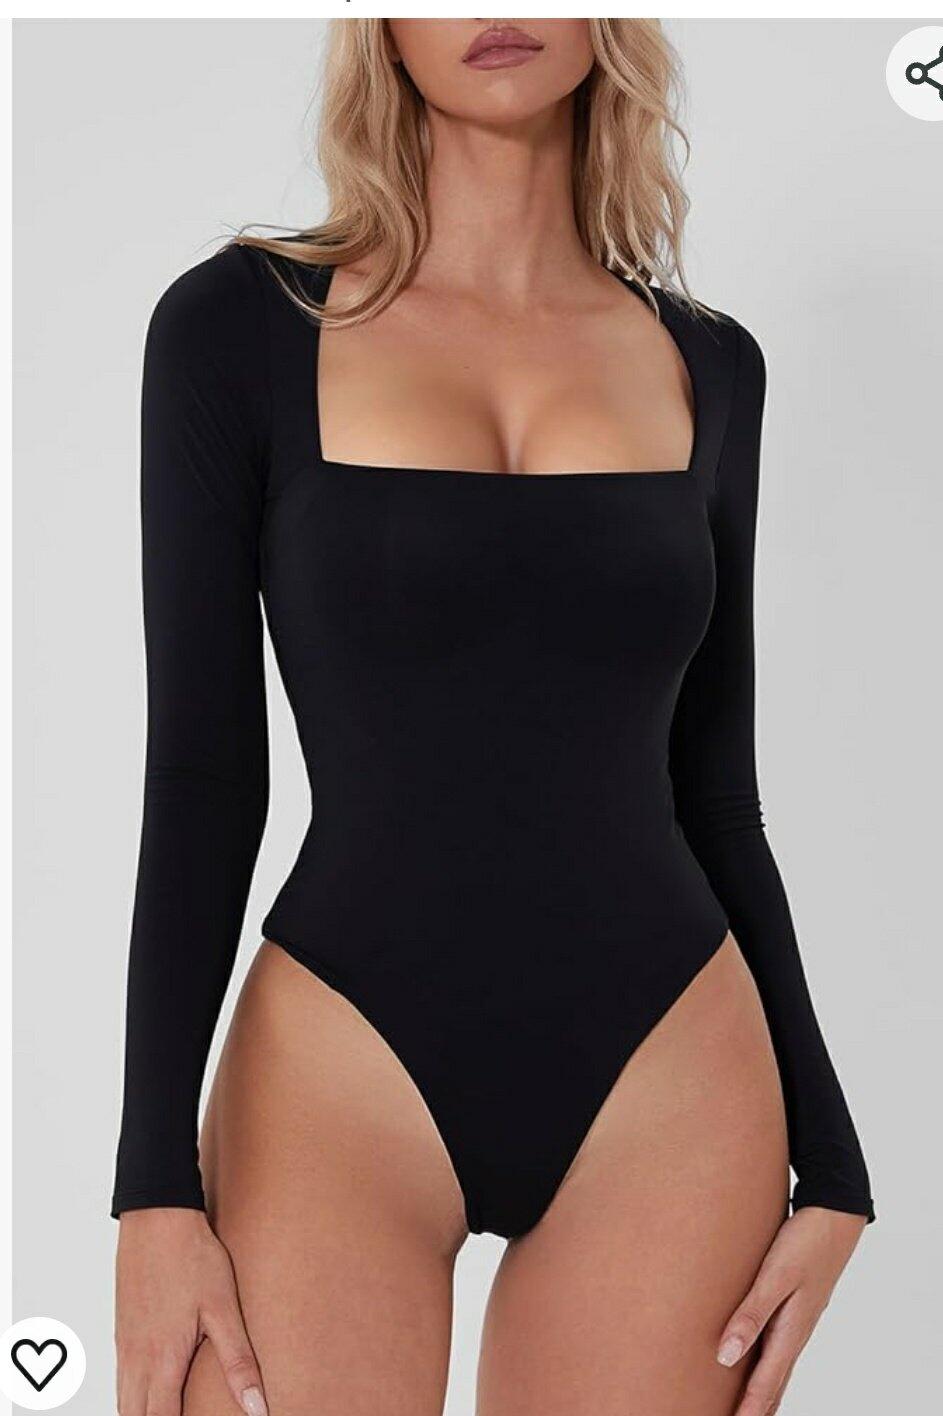 PUMIEY Women's Square Neck Long Sleeve Bodysuit Sexy Body Suit